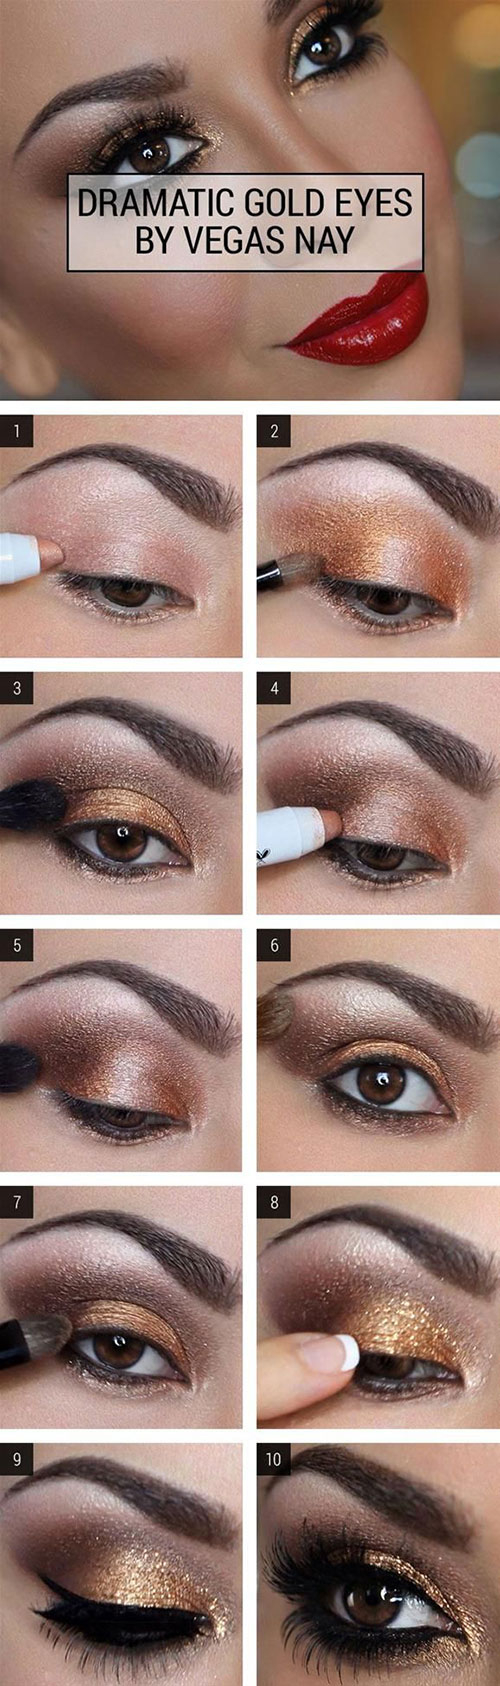 Gold Eye Makeup Tutorial How To Do Smokey Eye Makeup Top 10 Tutorial Pictures For 2019